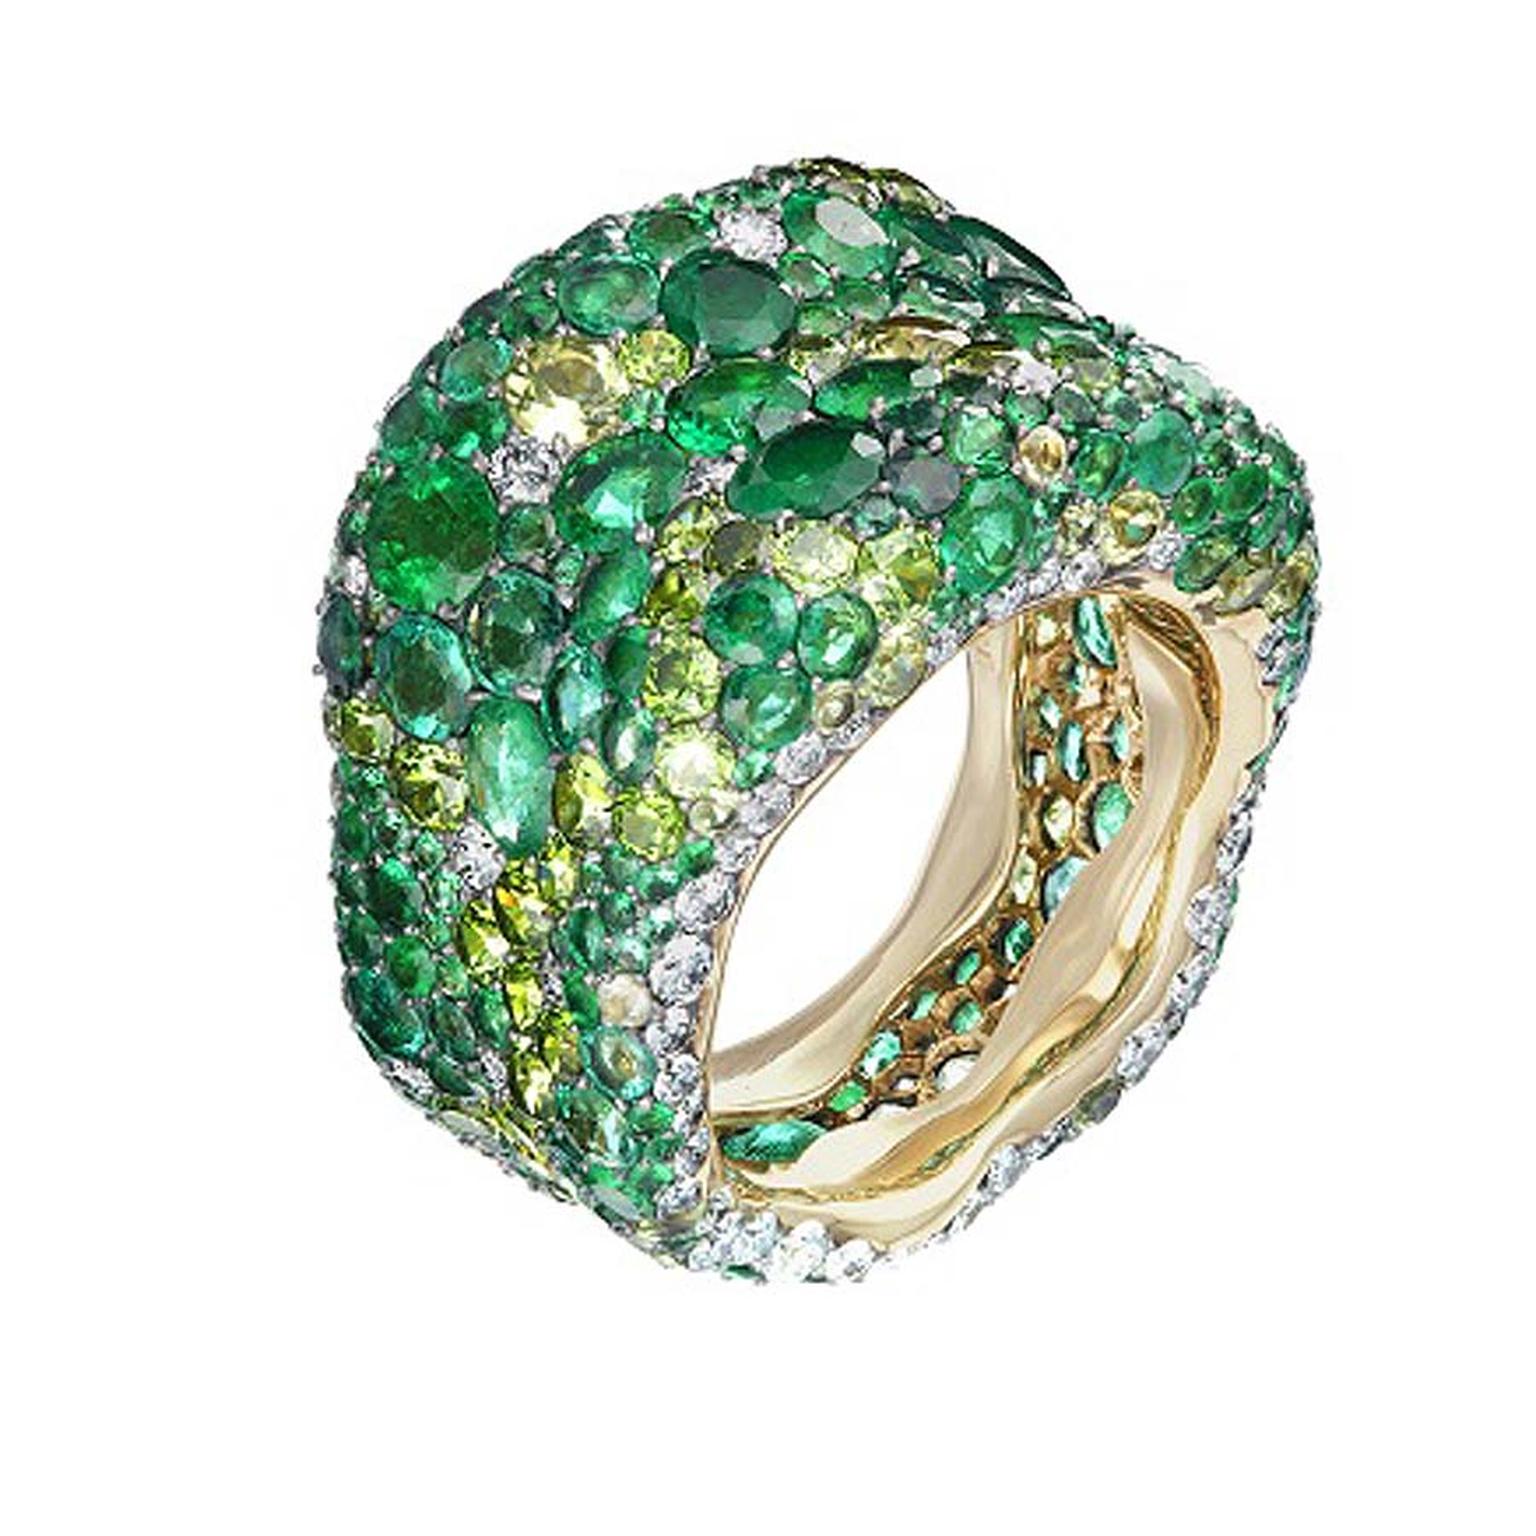 Fabergé Emotion ring pavé set with emeralds and other green coloured gemstones.